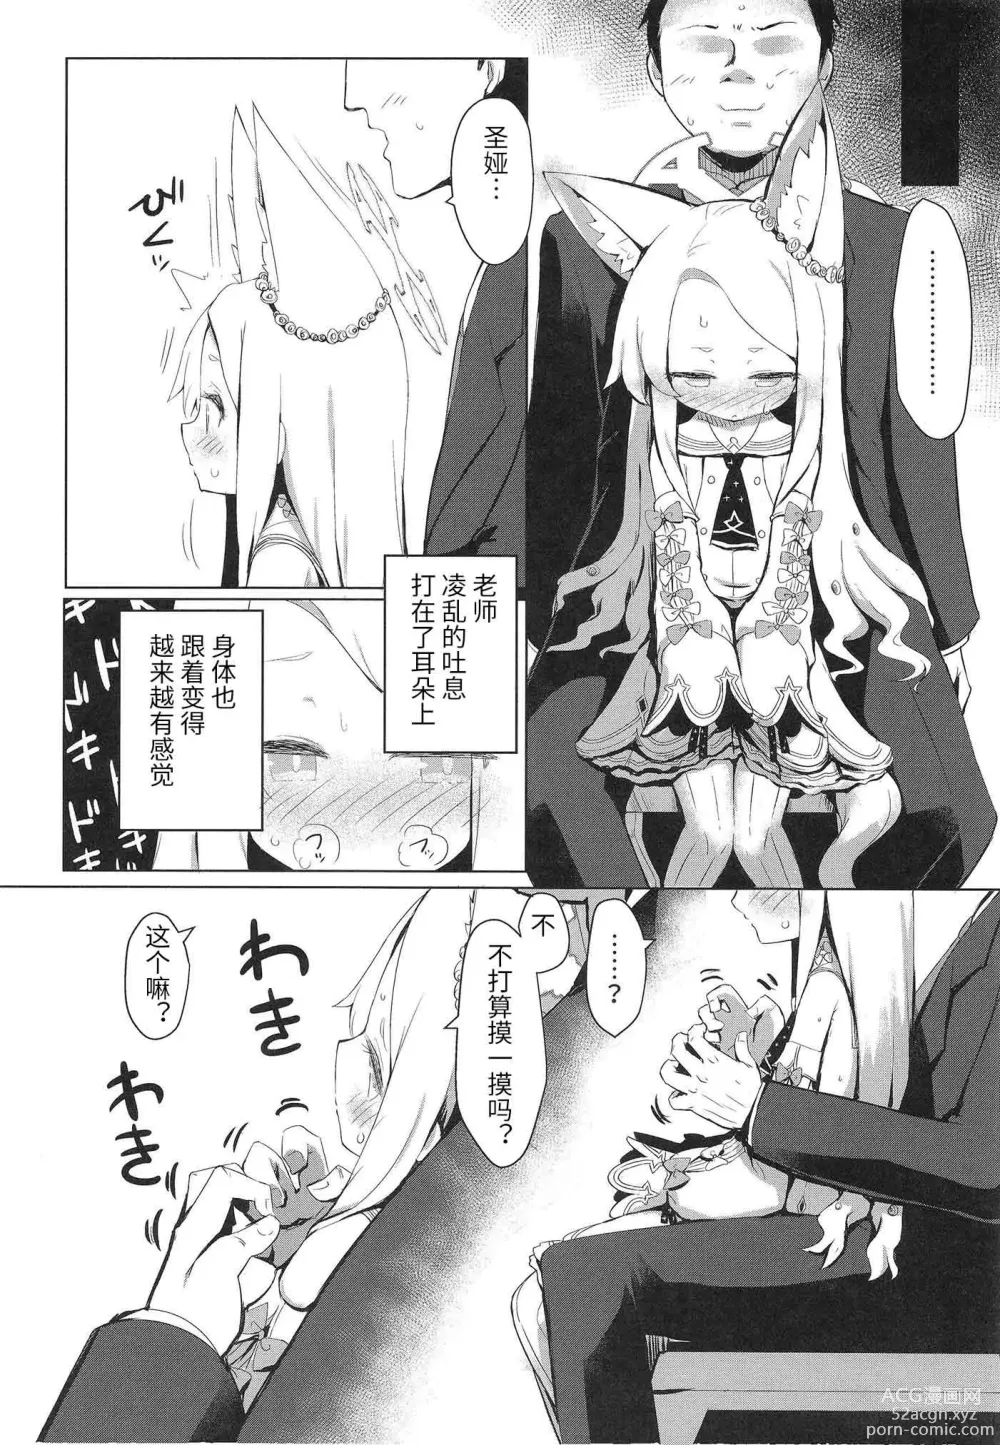 Page 8 of doujinshi 抱歉的发情圣娅